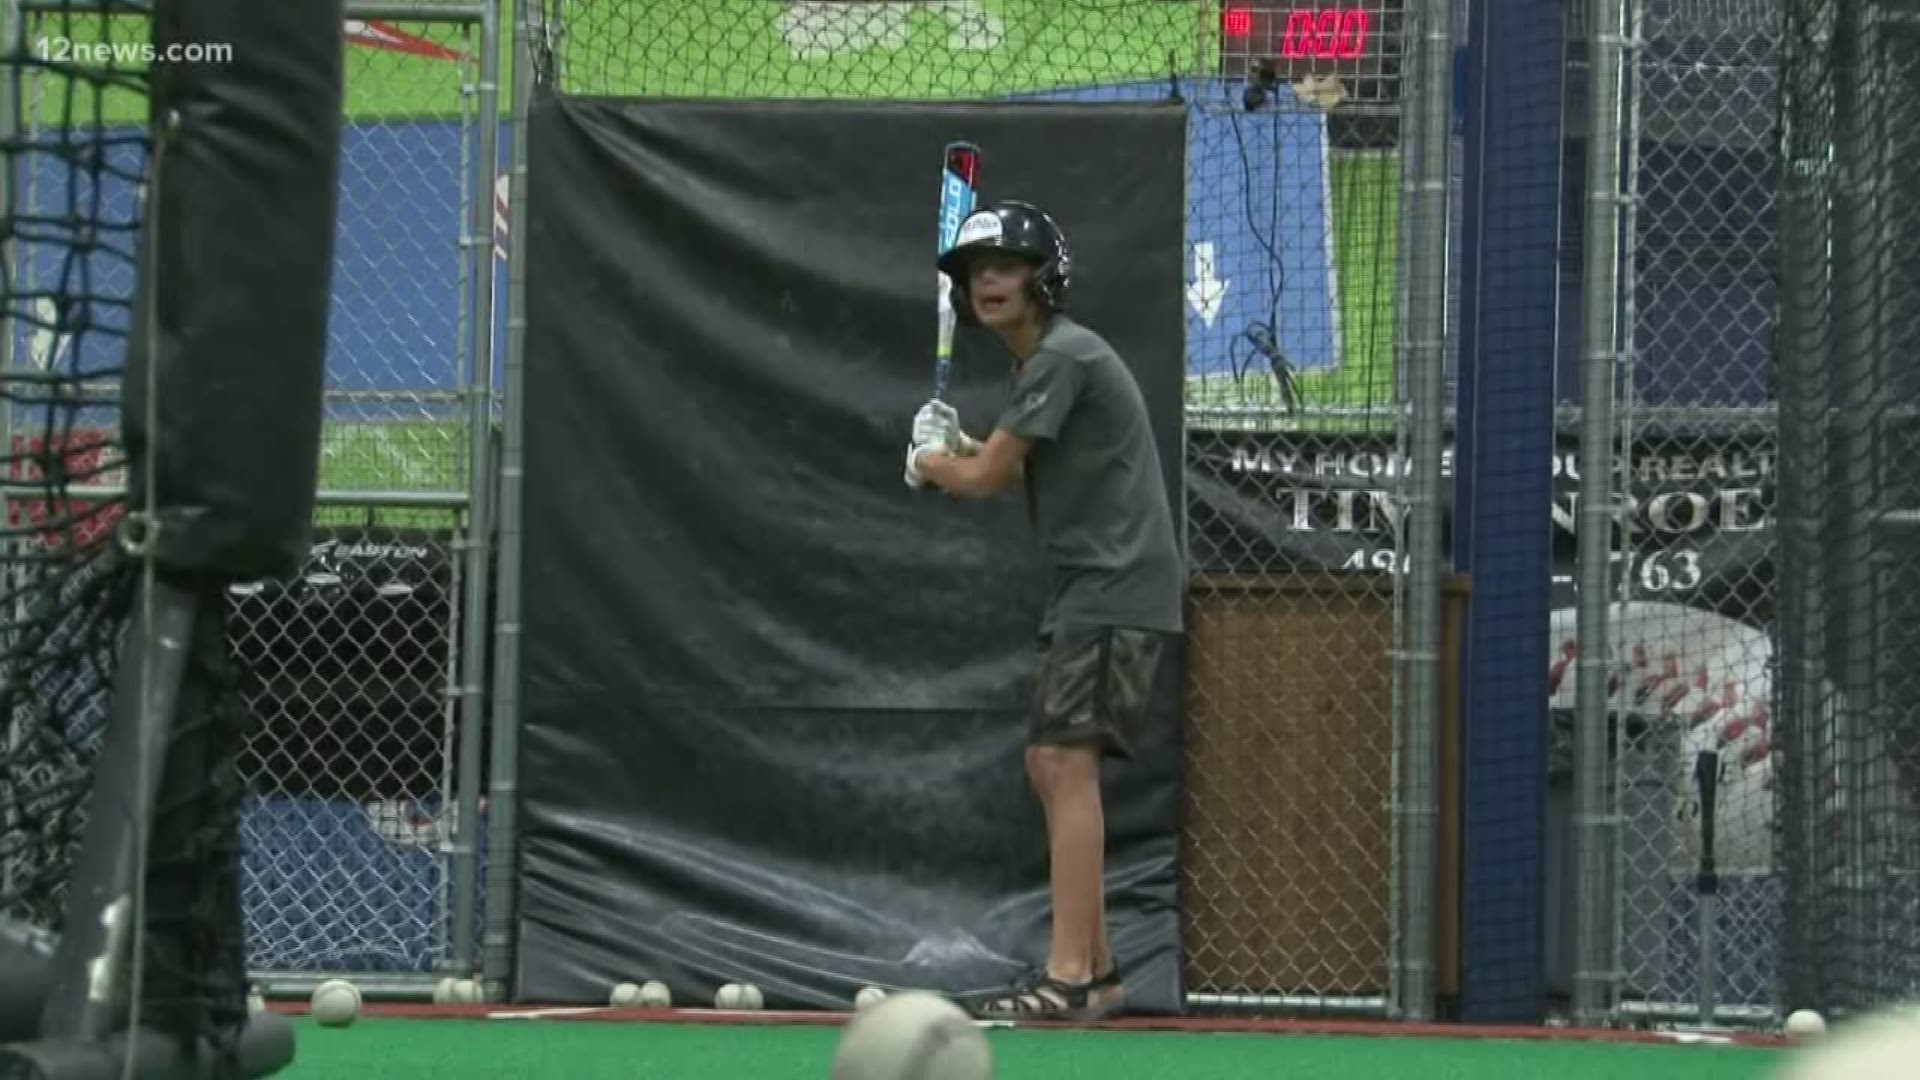 Dylan took some time at the batting cage to hone his baseball skills. Meet him in this week's Wednesday's Child segment.